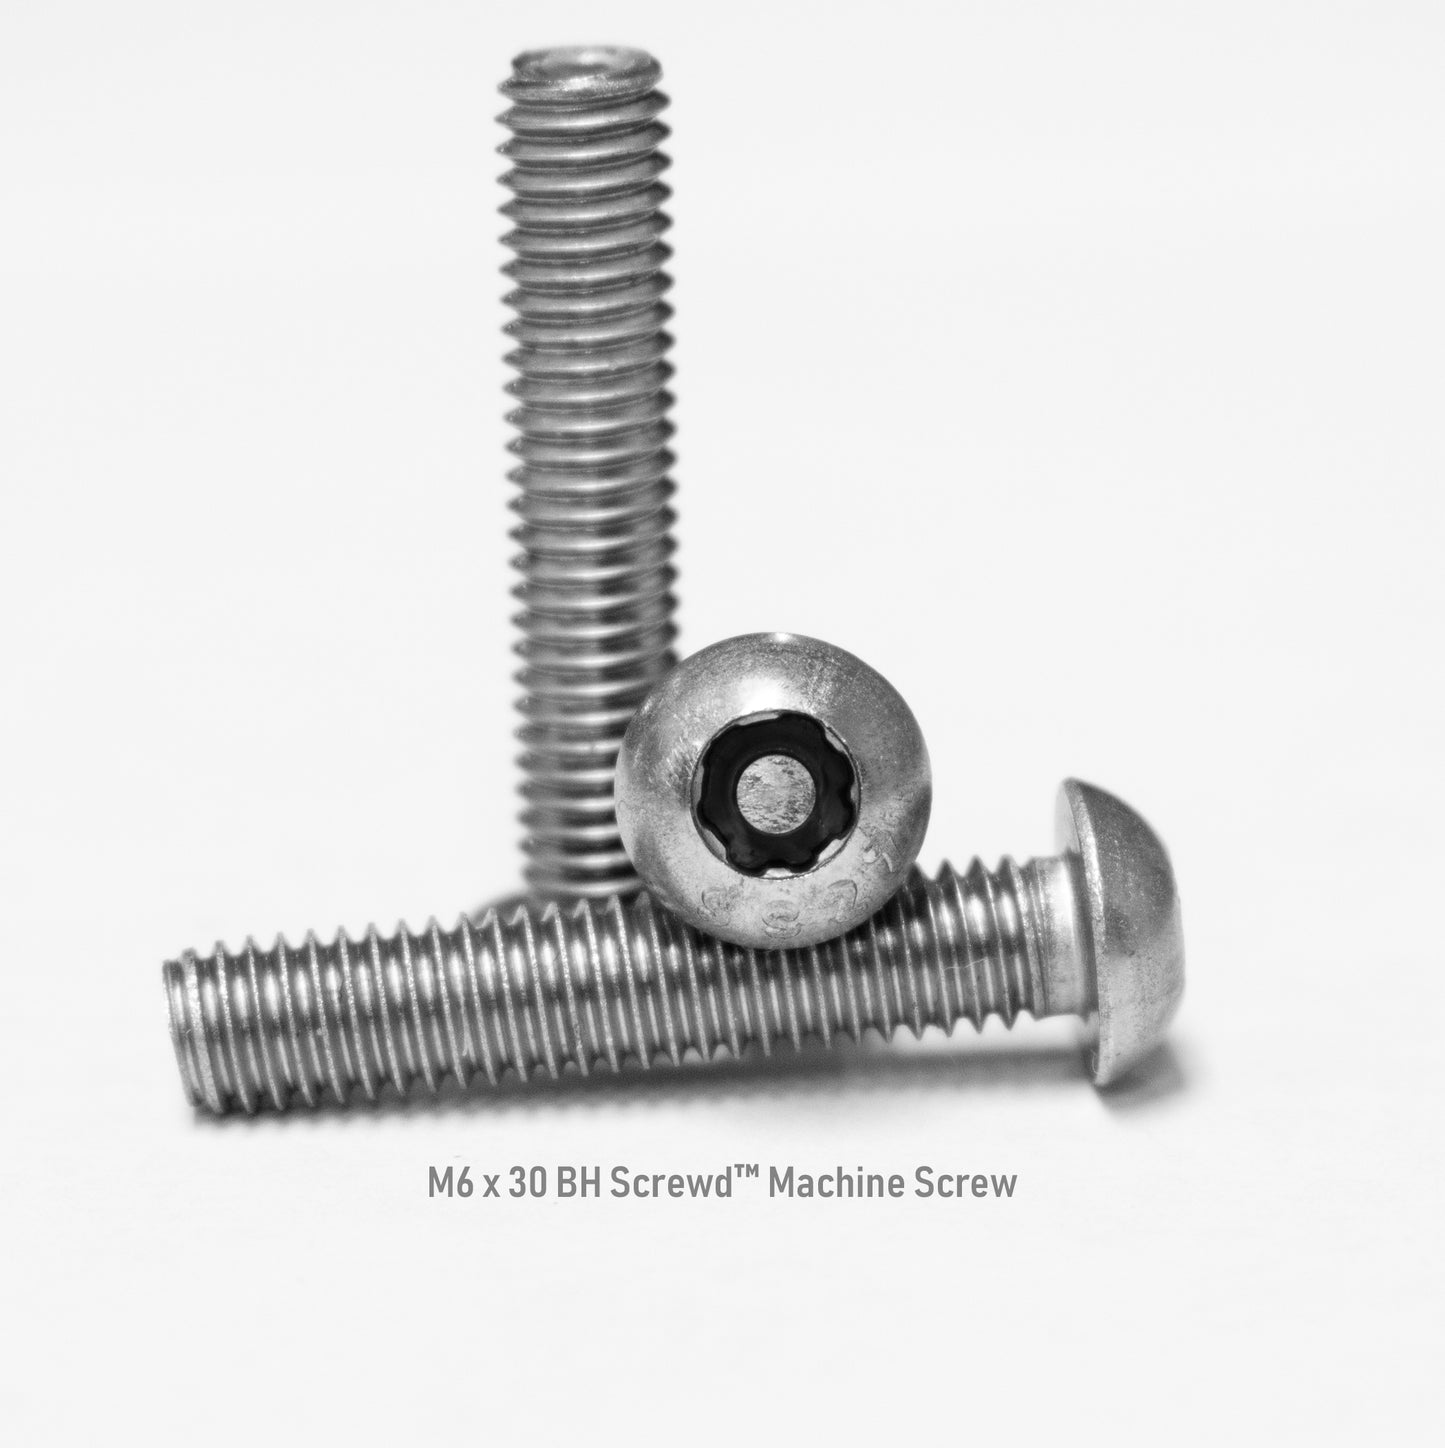 M6 x 30 Button Head Screwd® Security Metric Machine Screw Made out of Stainless Steel